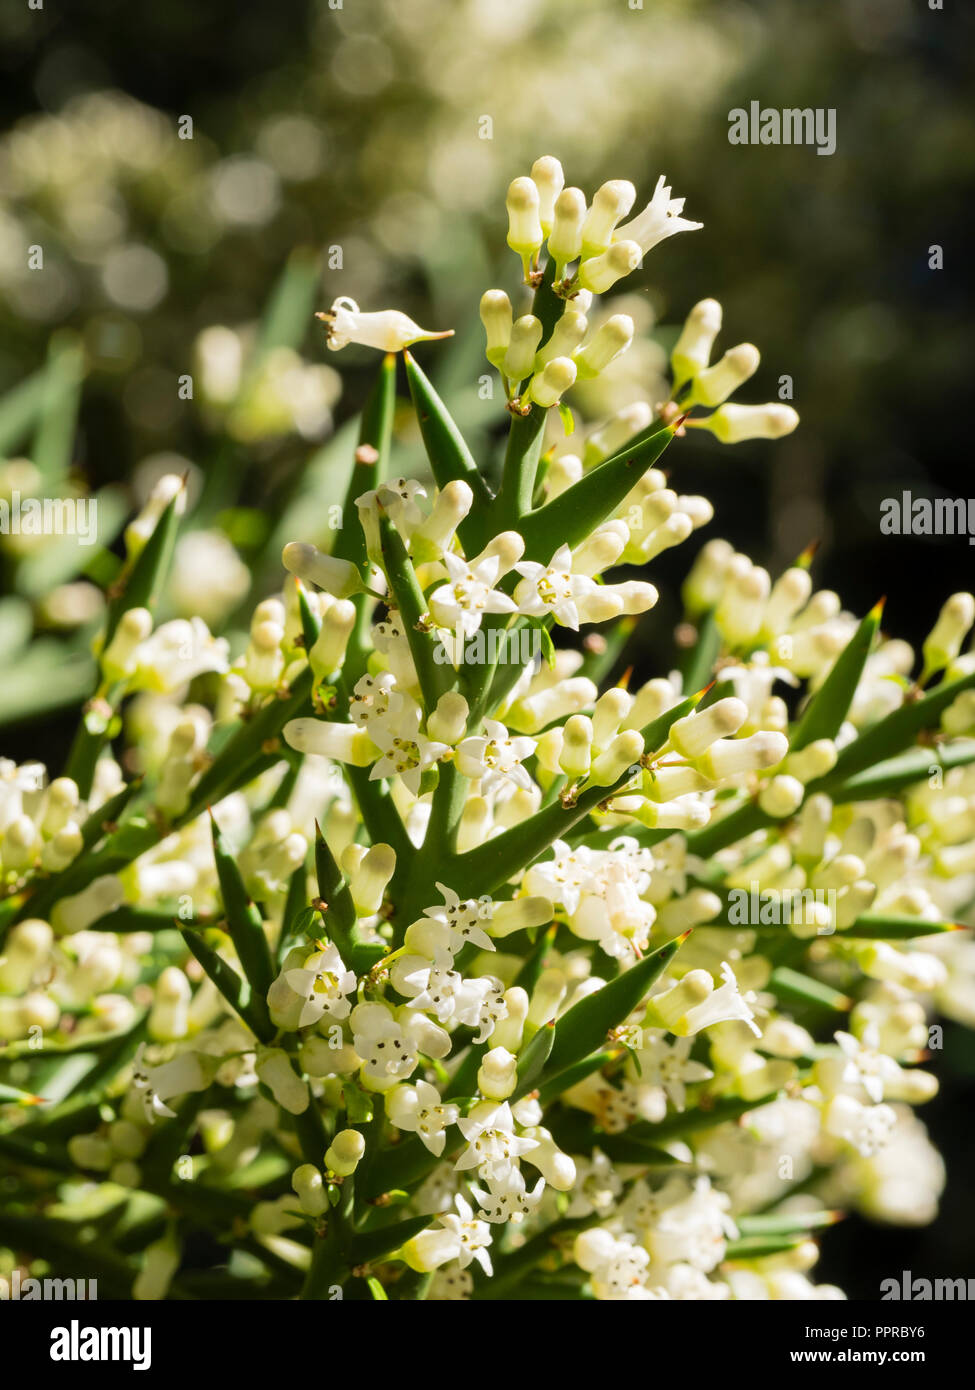 Early autumn white flowers adorn the spiny modified leaves of the half hardy Crucifixion thorn, Colletia hystrix (C.armata) Stock Photo